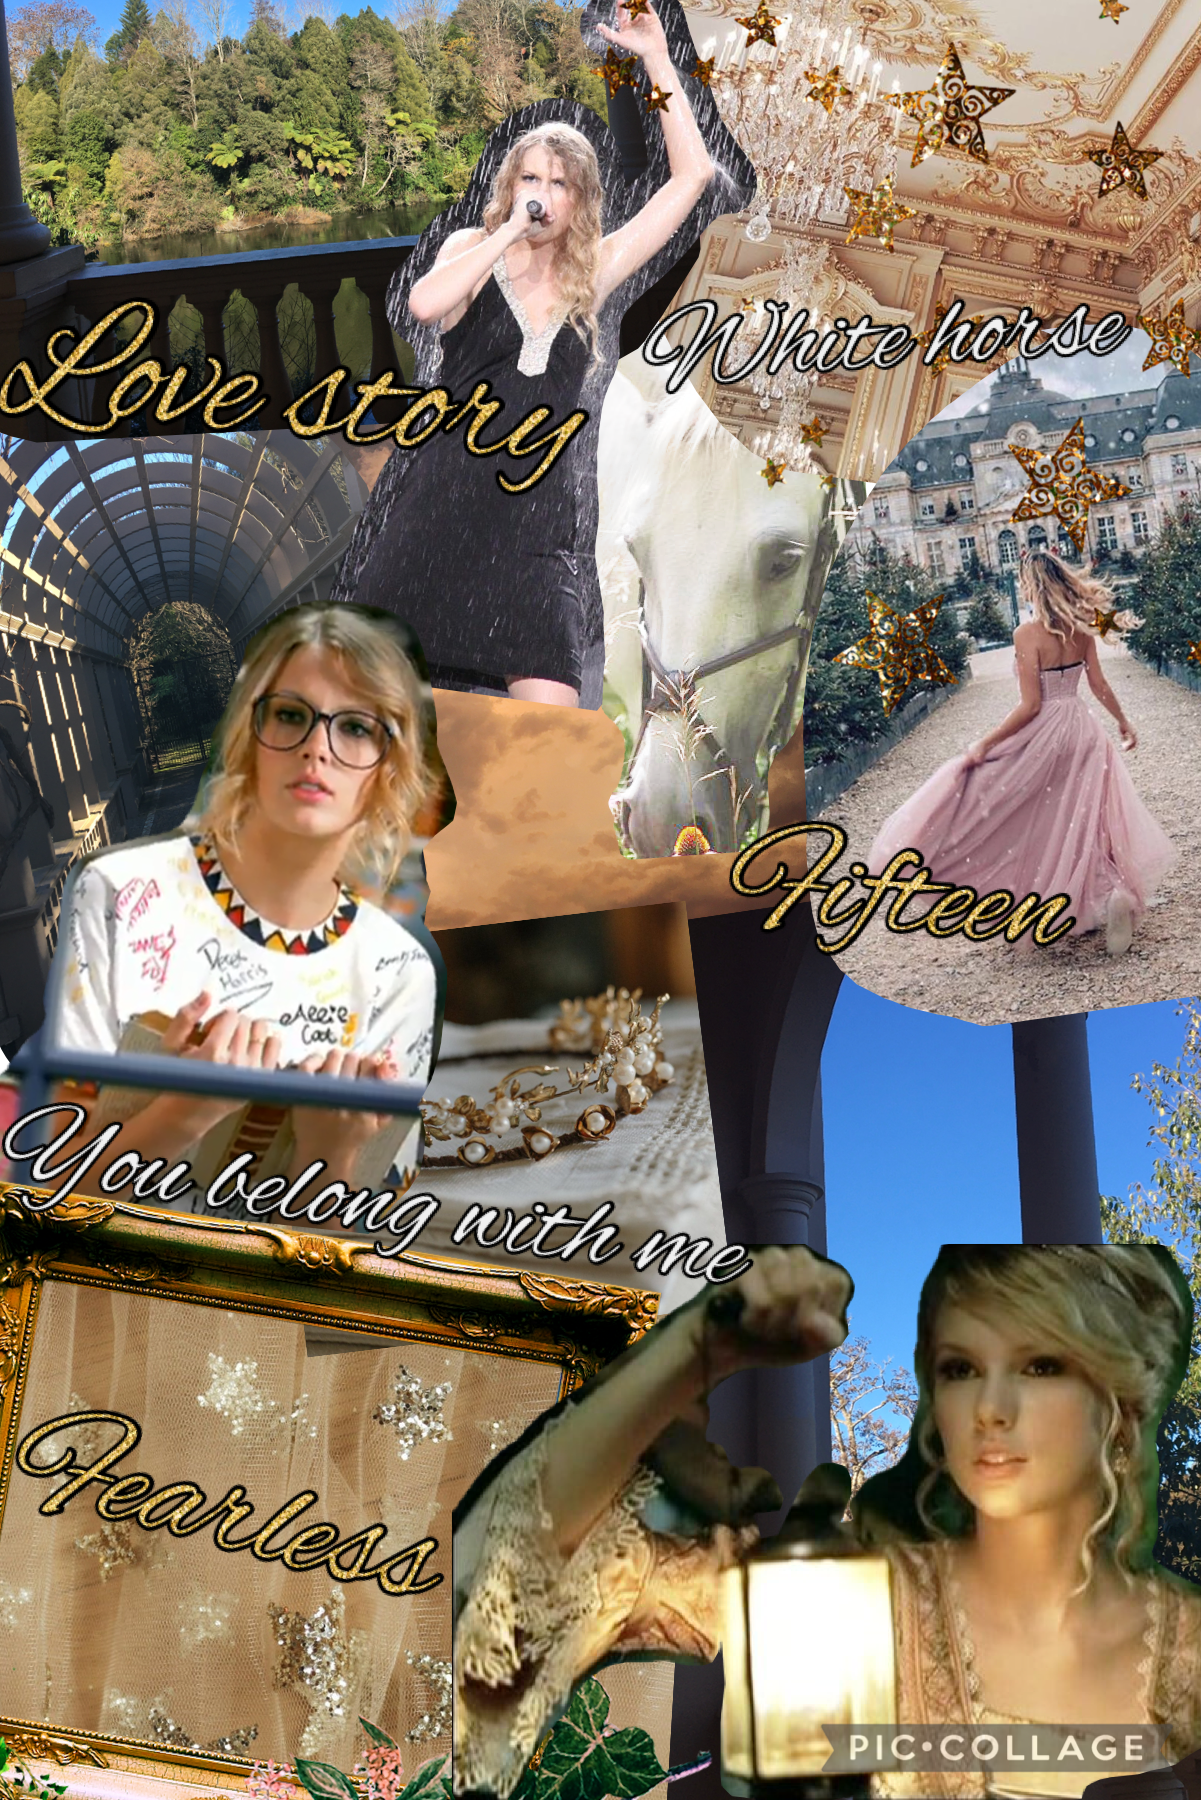 Fearless Taylor Swift collage 4.7.21